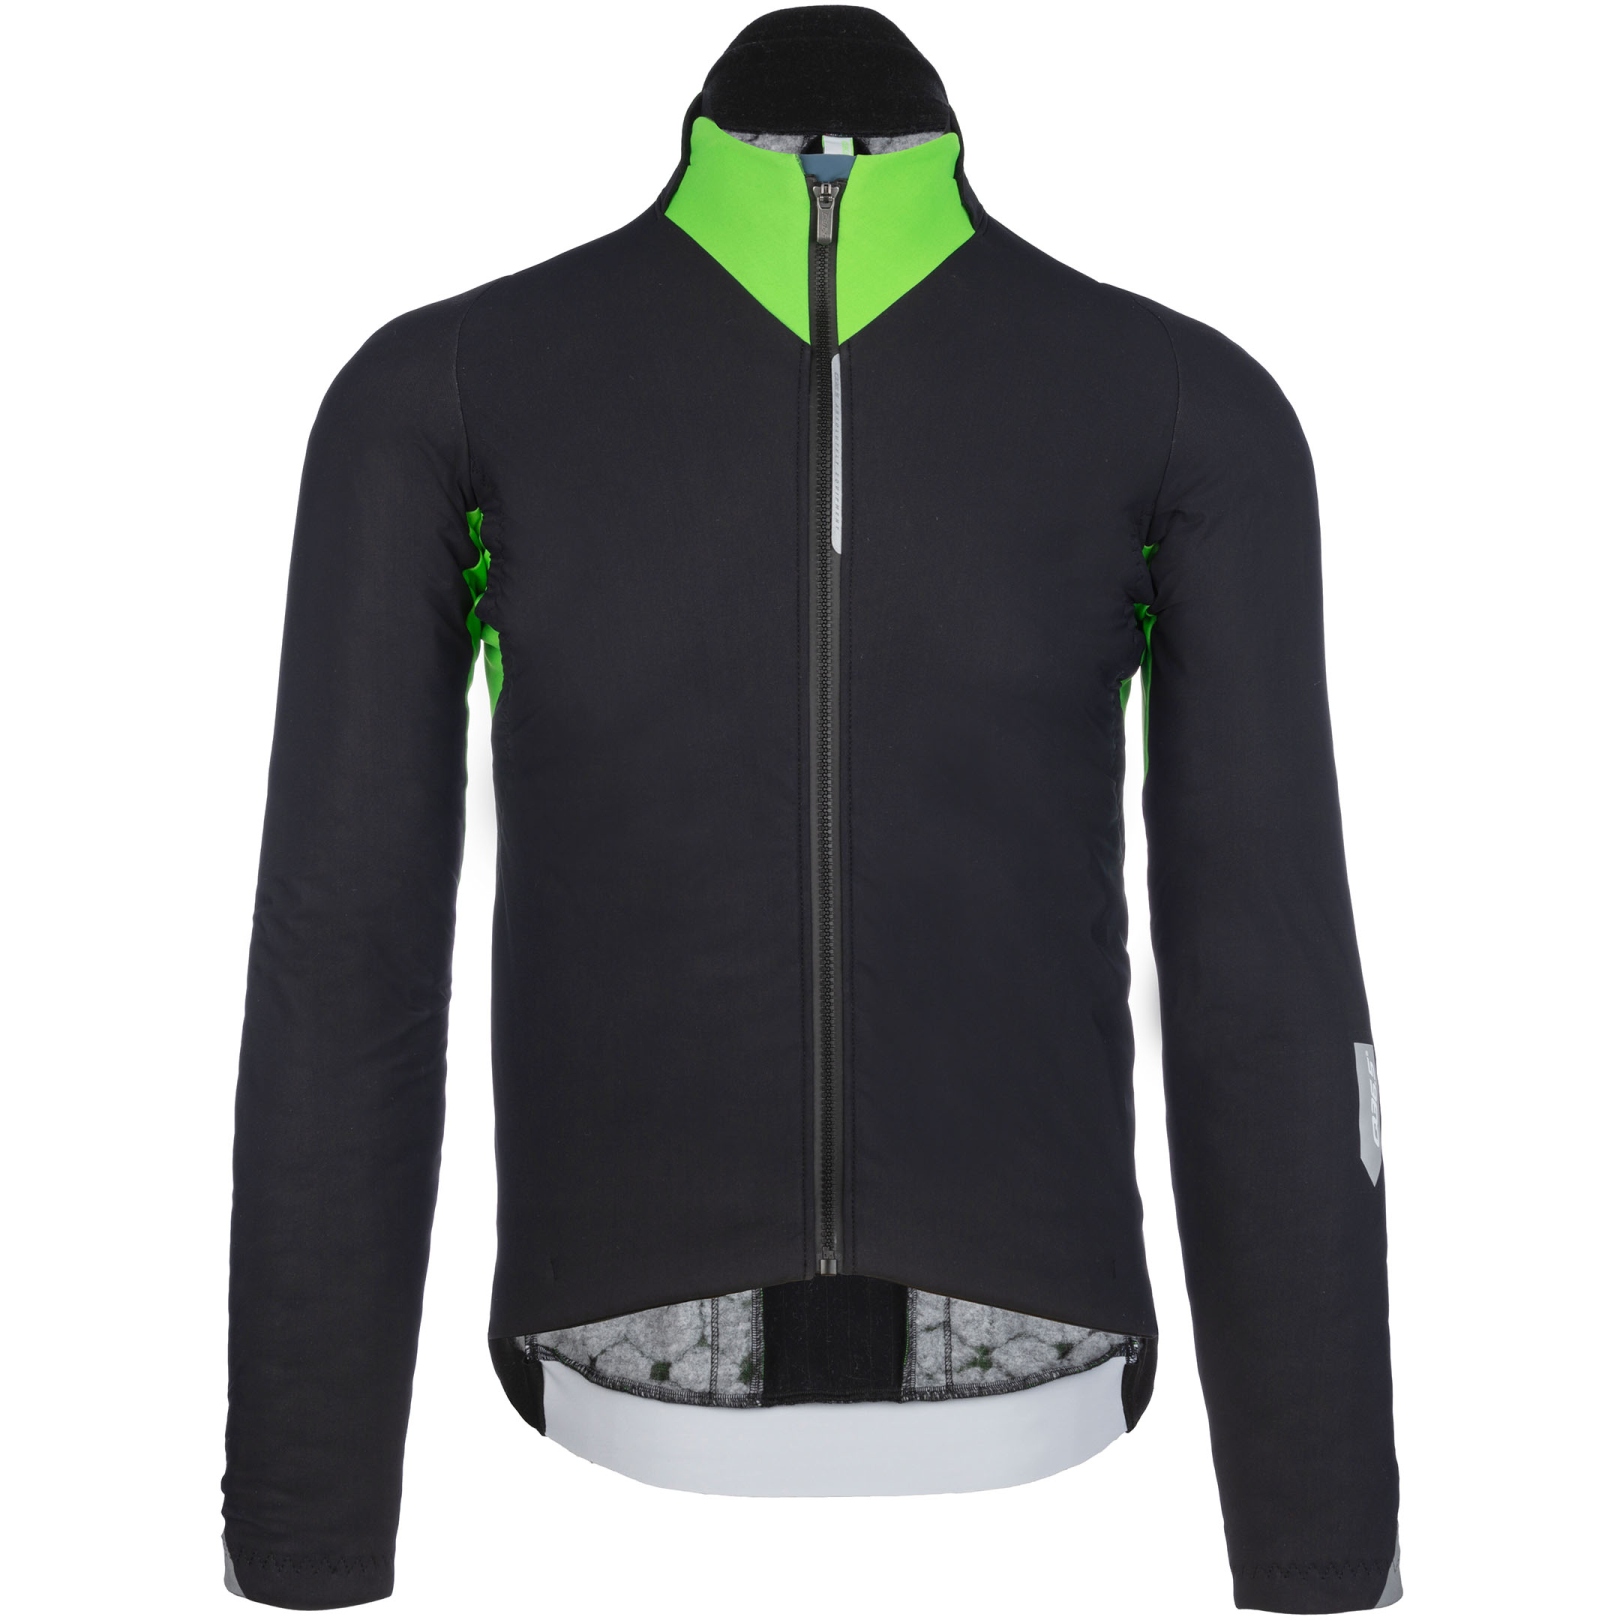 Picture of Q36.5 Interval Termica Jacket - fluo green